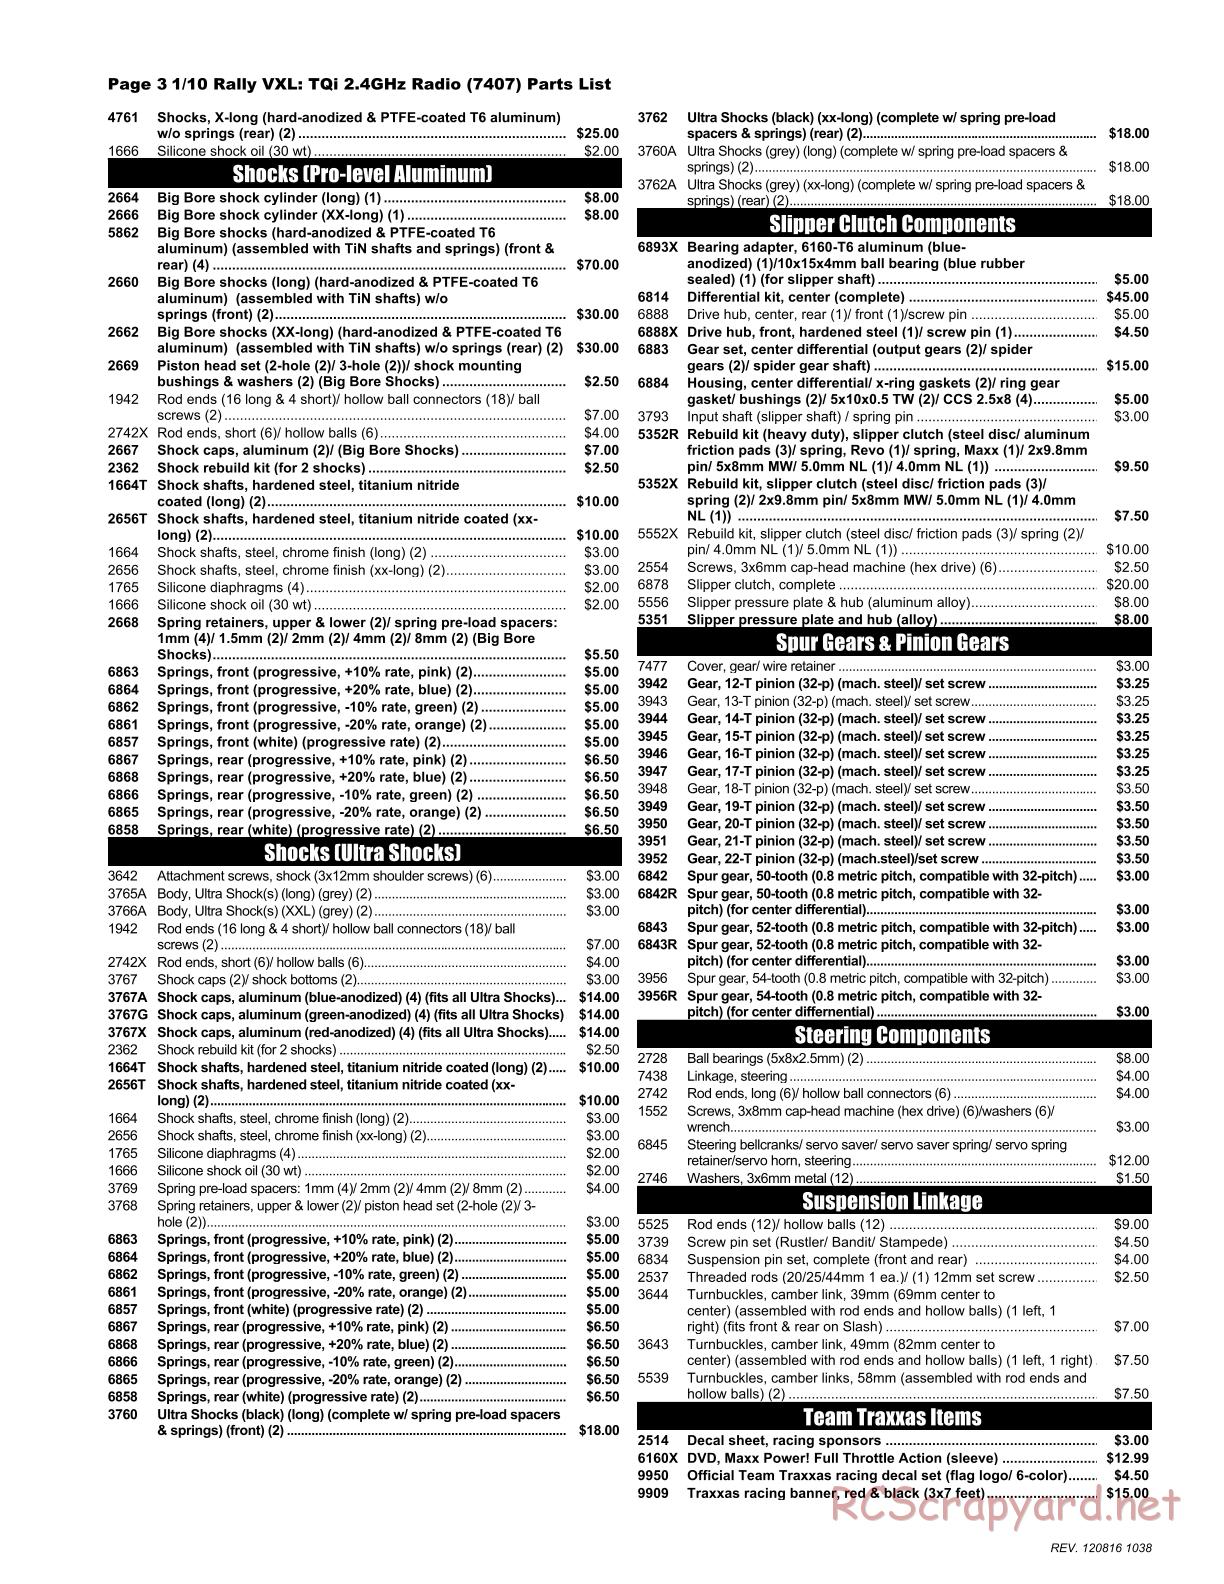 Traxxas - Rally (2012) - Parts List - Page 3